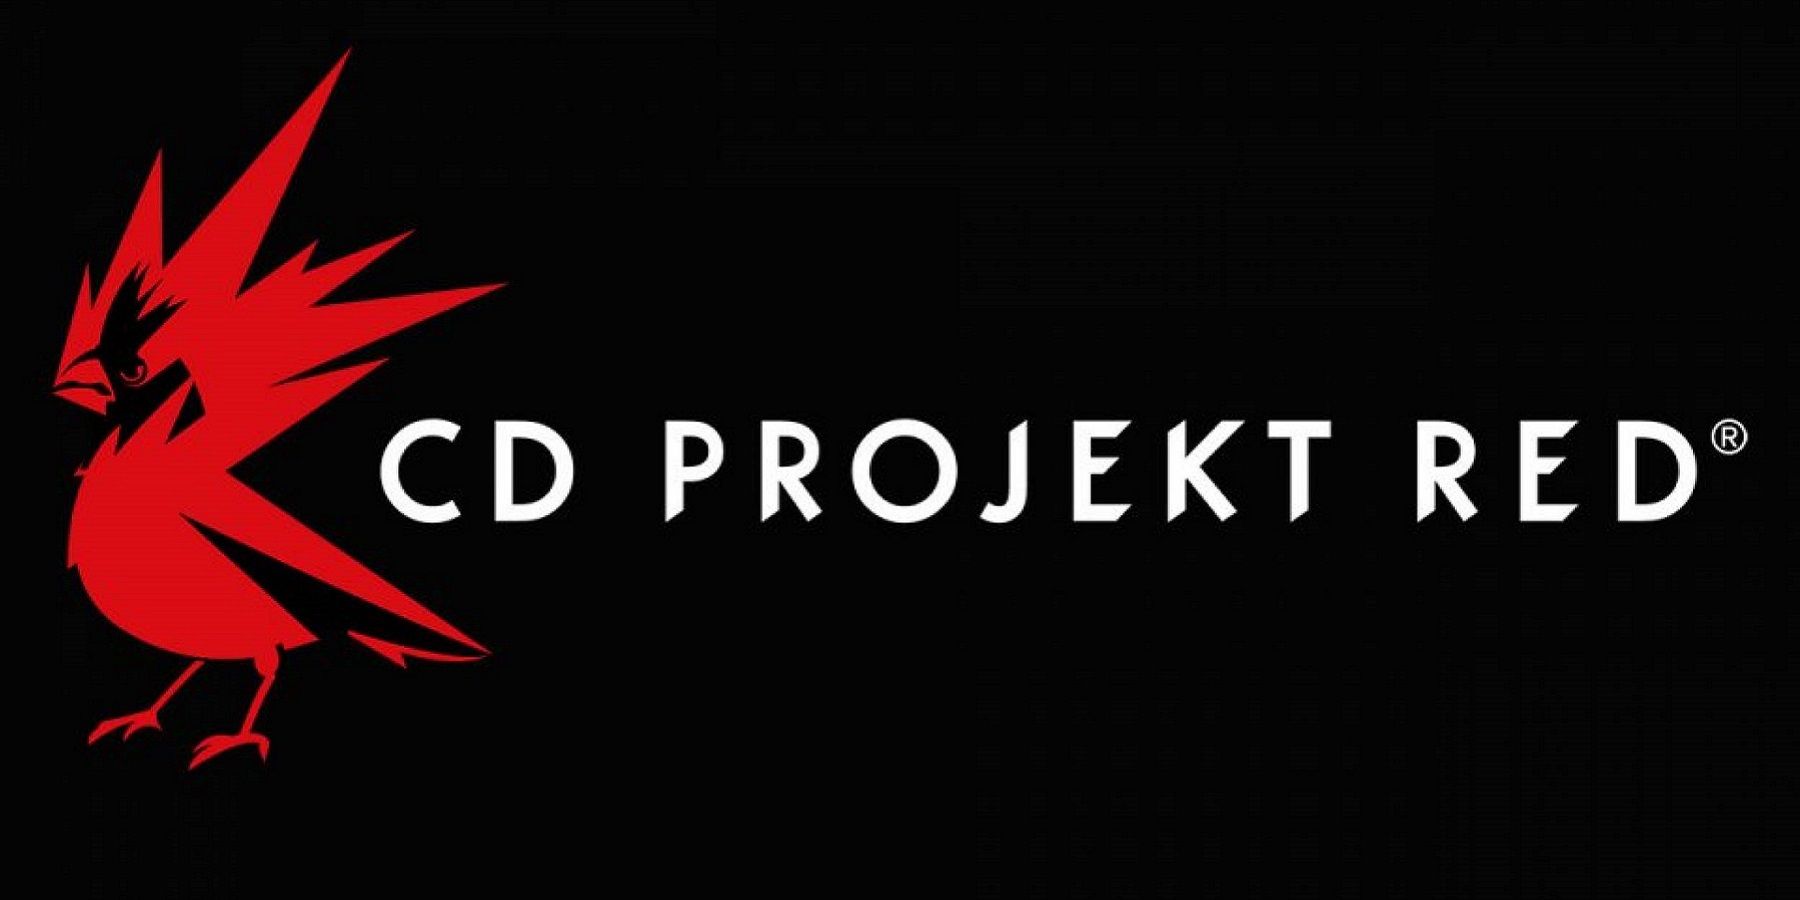 The CD Projekt Red logo next to the red bird, all on a black background.